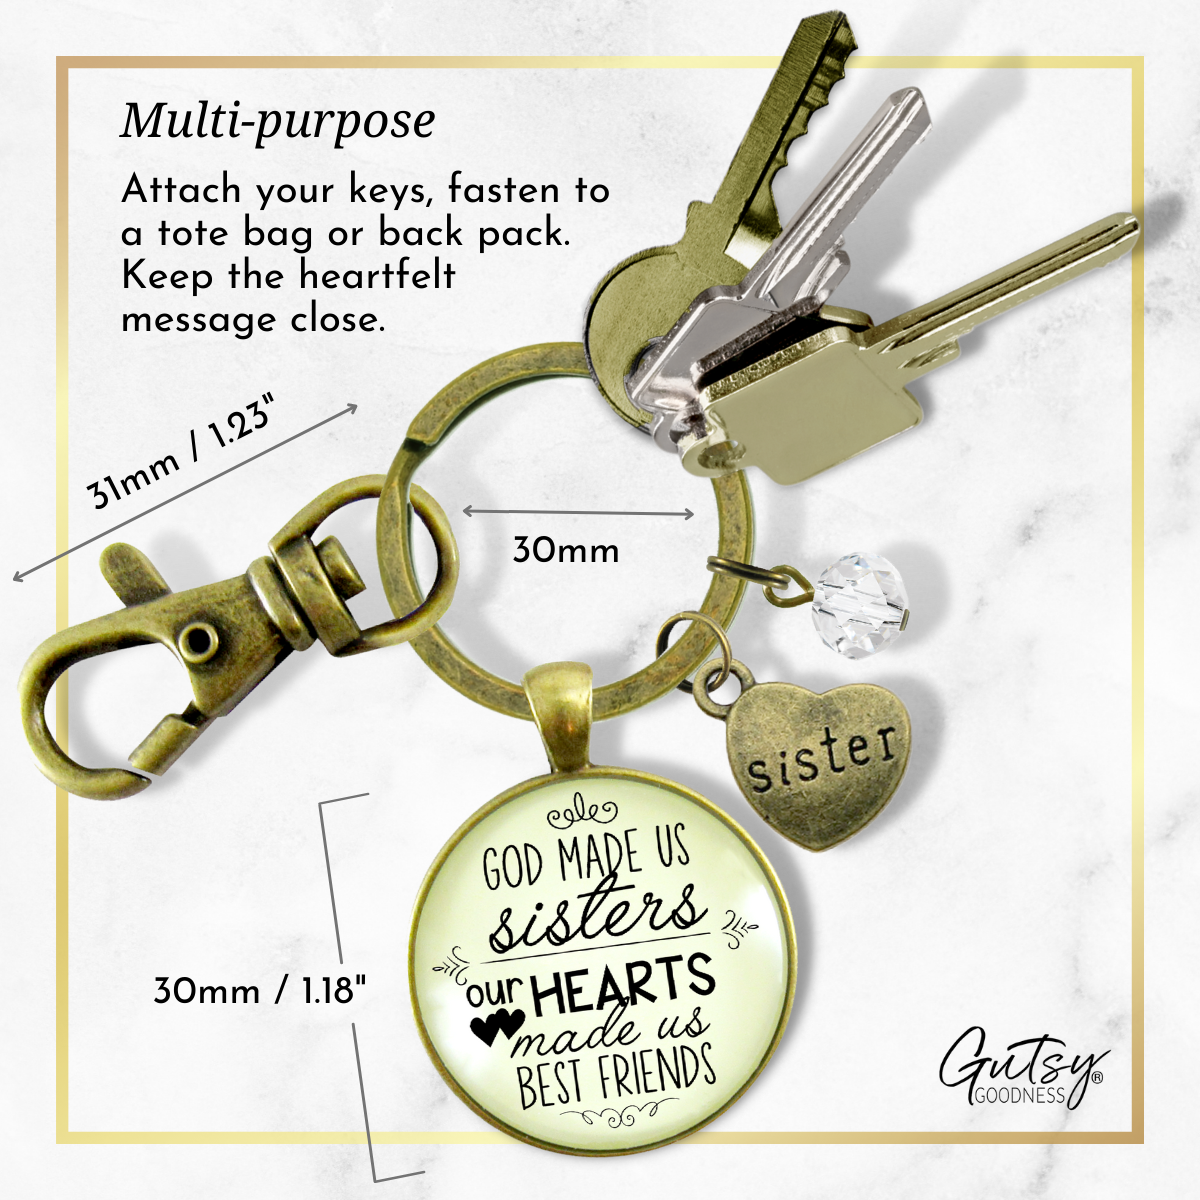 Sisters Keychain God Made Us Sisters Best Friends Faith Pendant Jewelry Heart Charm - Gutsy Goodness Handmade Jewelry;Sisters Keychain God Made Us Sisters Best Friends Faith Pendant Jewelry Heart Charm - Gutsy Goodness Handmade Jewelry Gifts